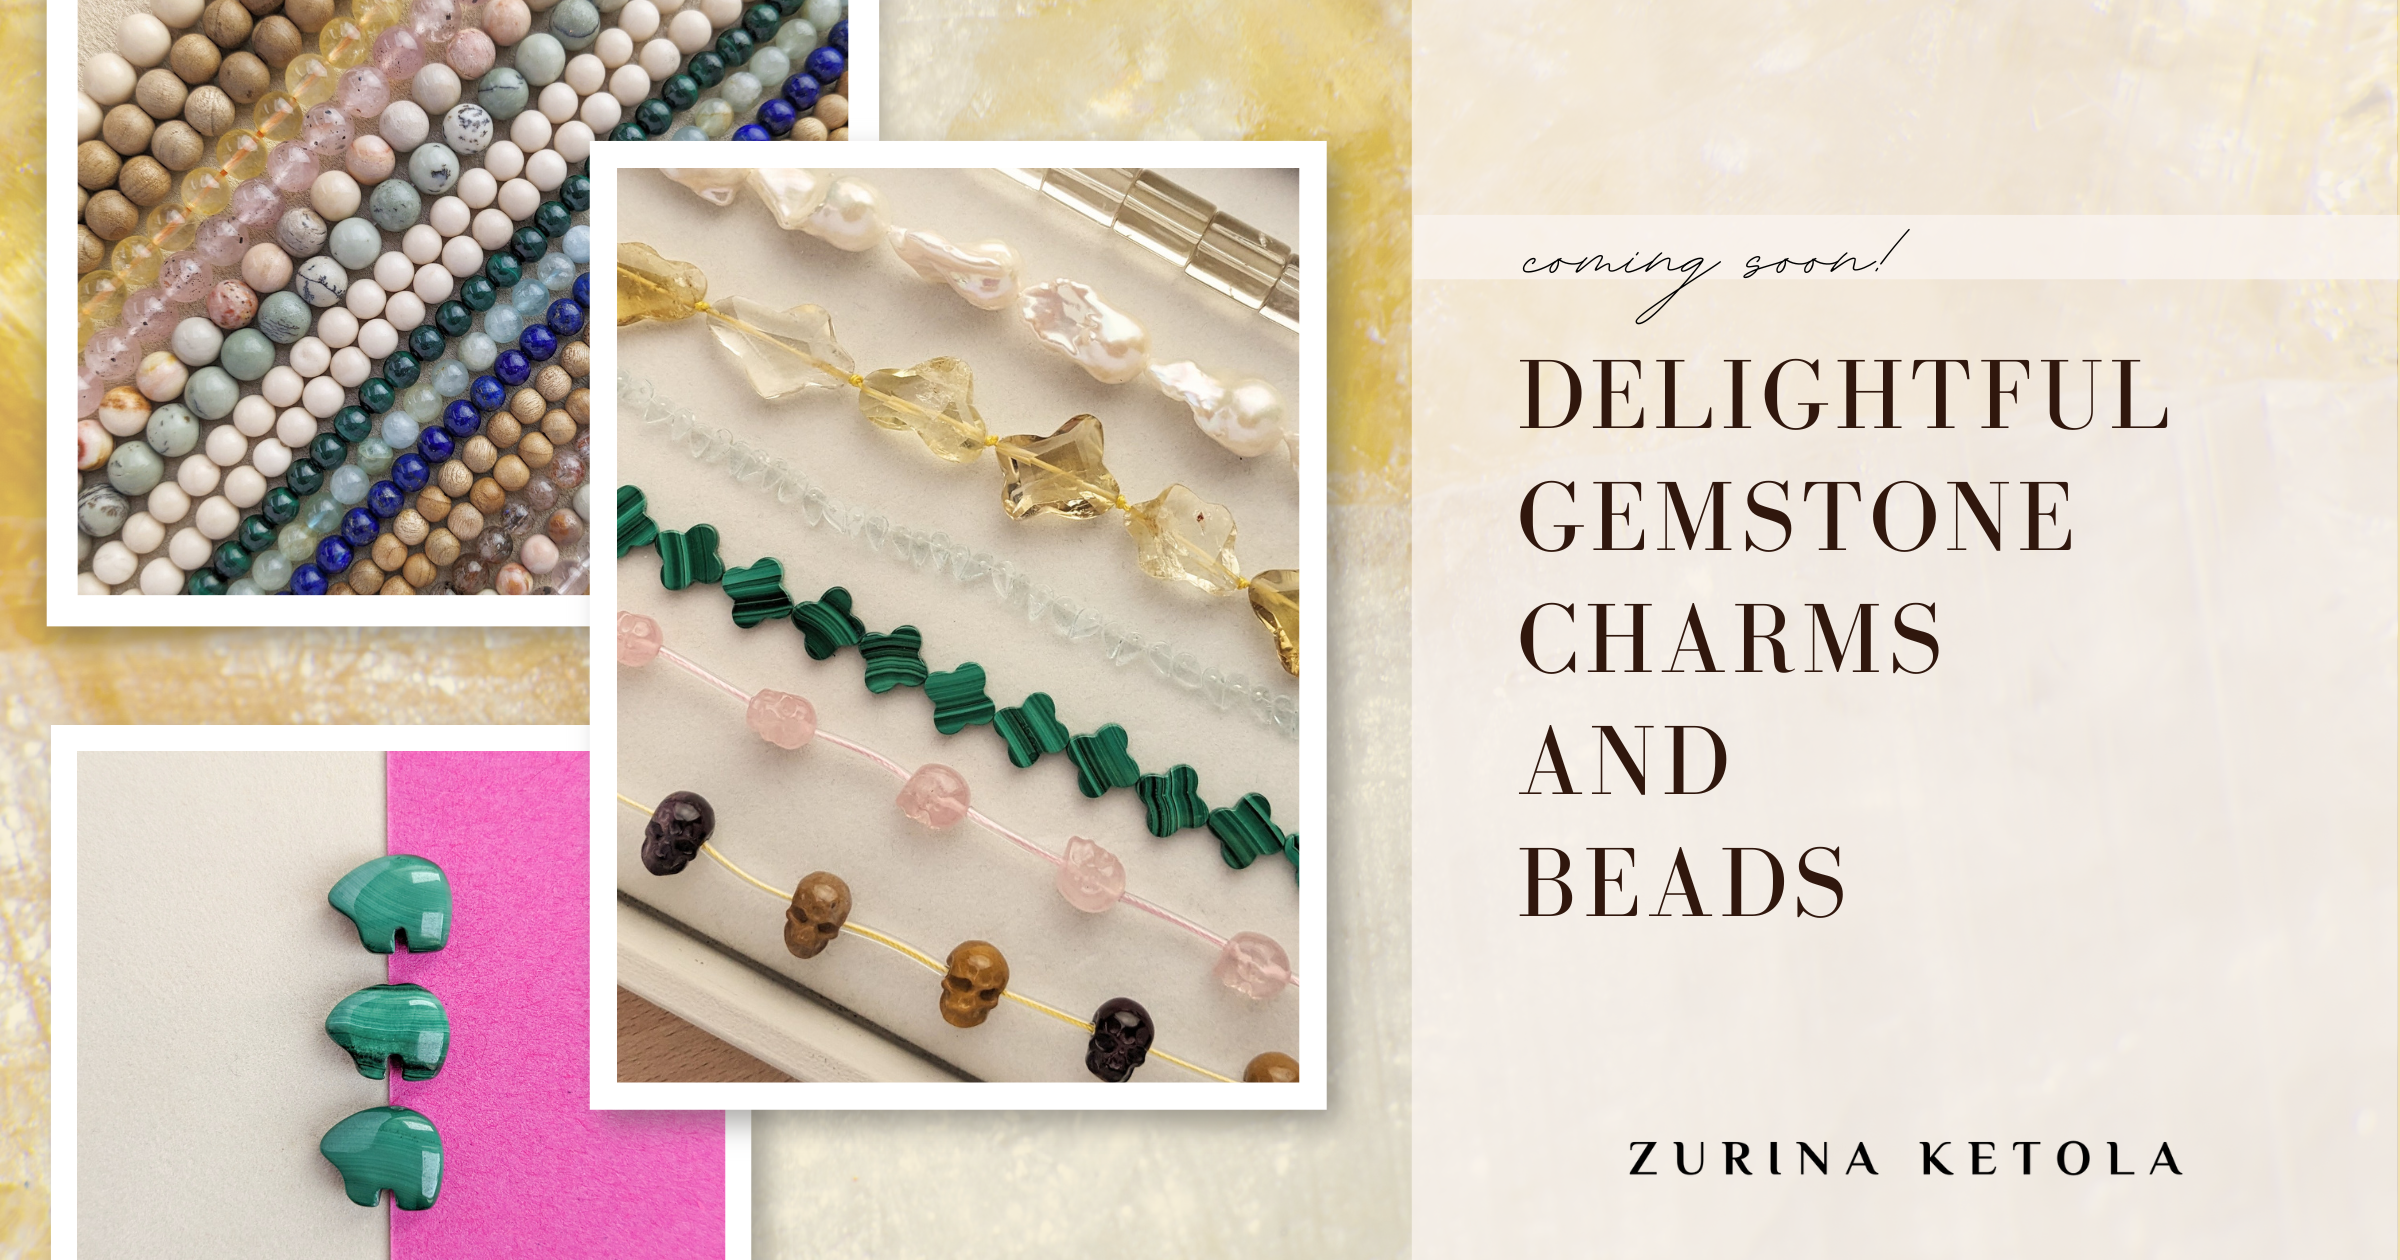 This image showcases a collage of Delightful Gemstone Charms and Beads. Bold carved gemstones, large organic pearls, and colorful beads are featured.